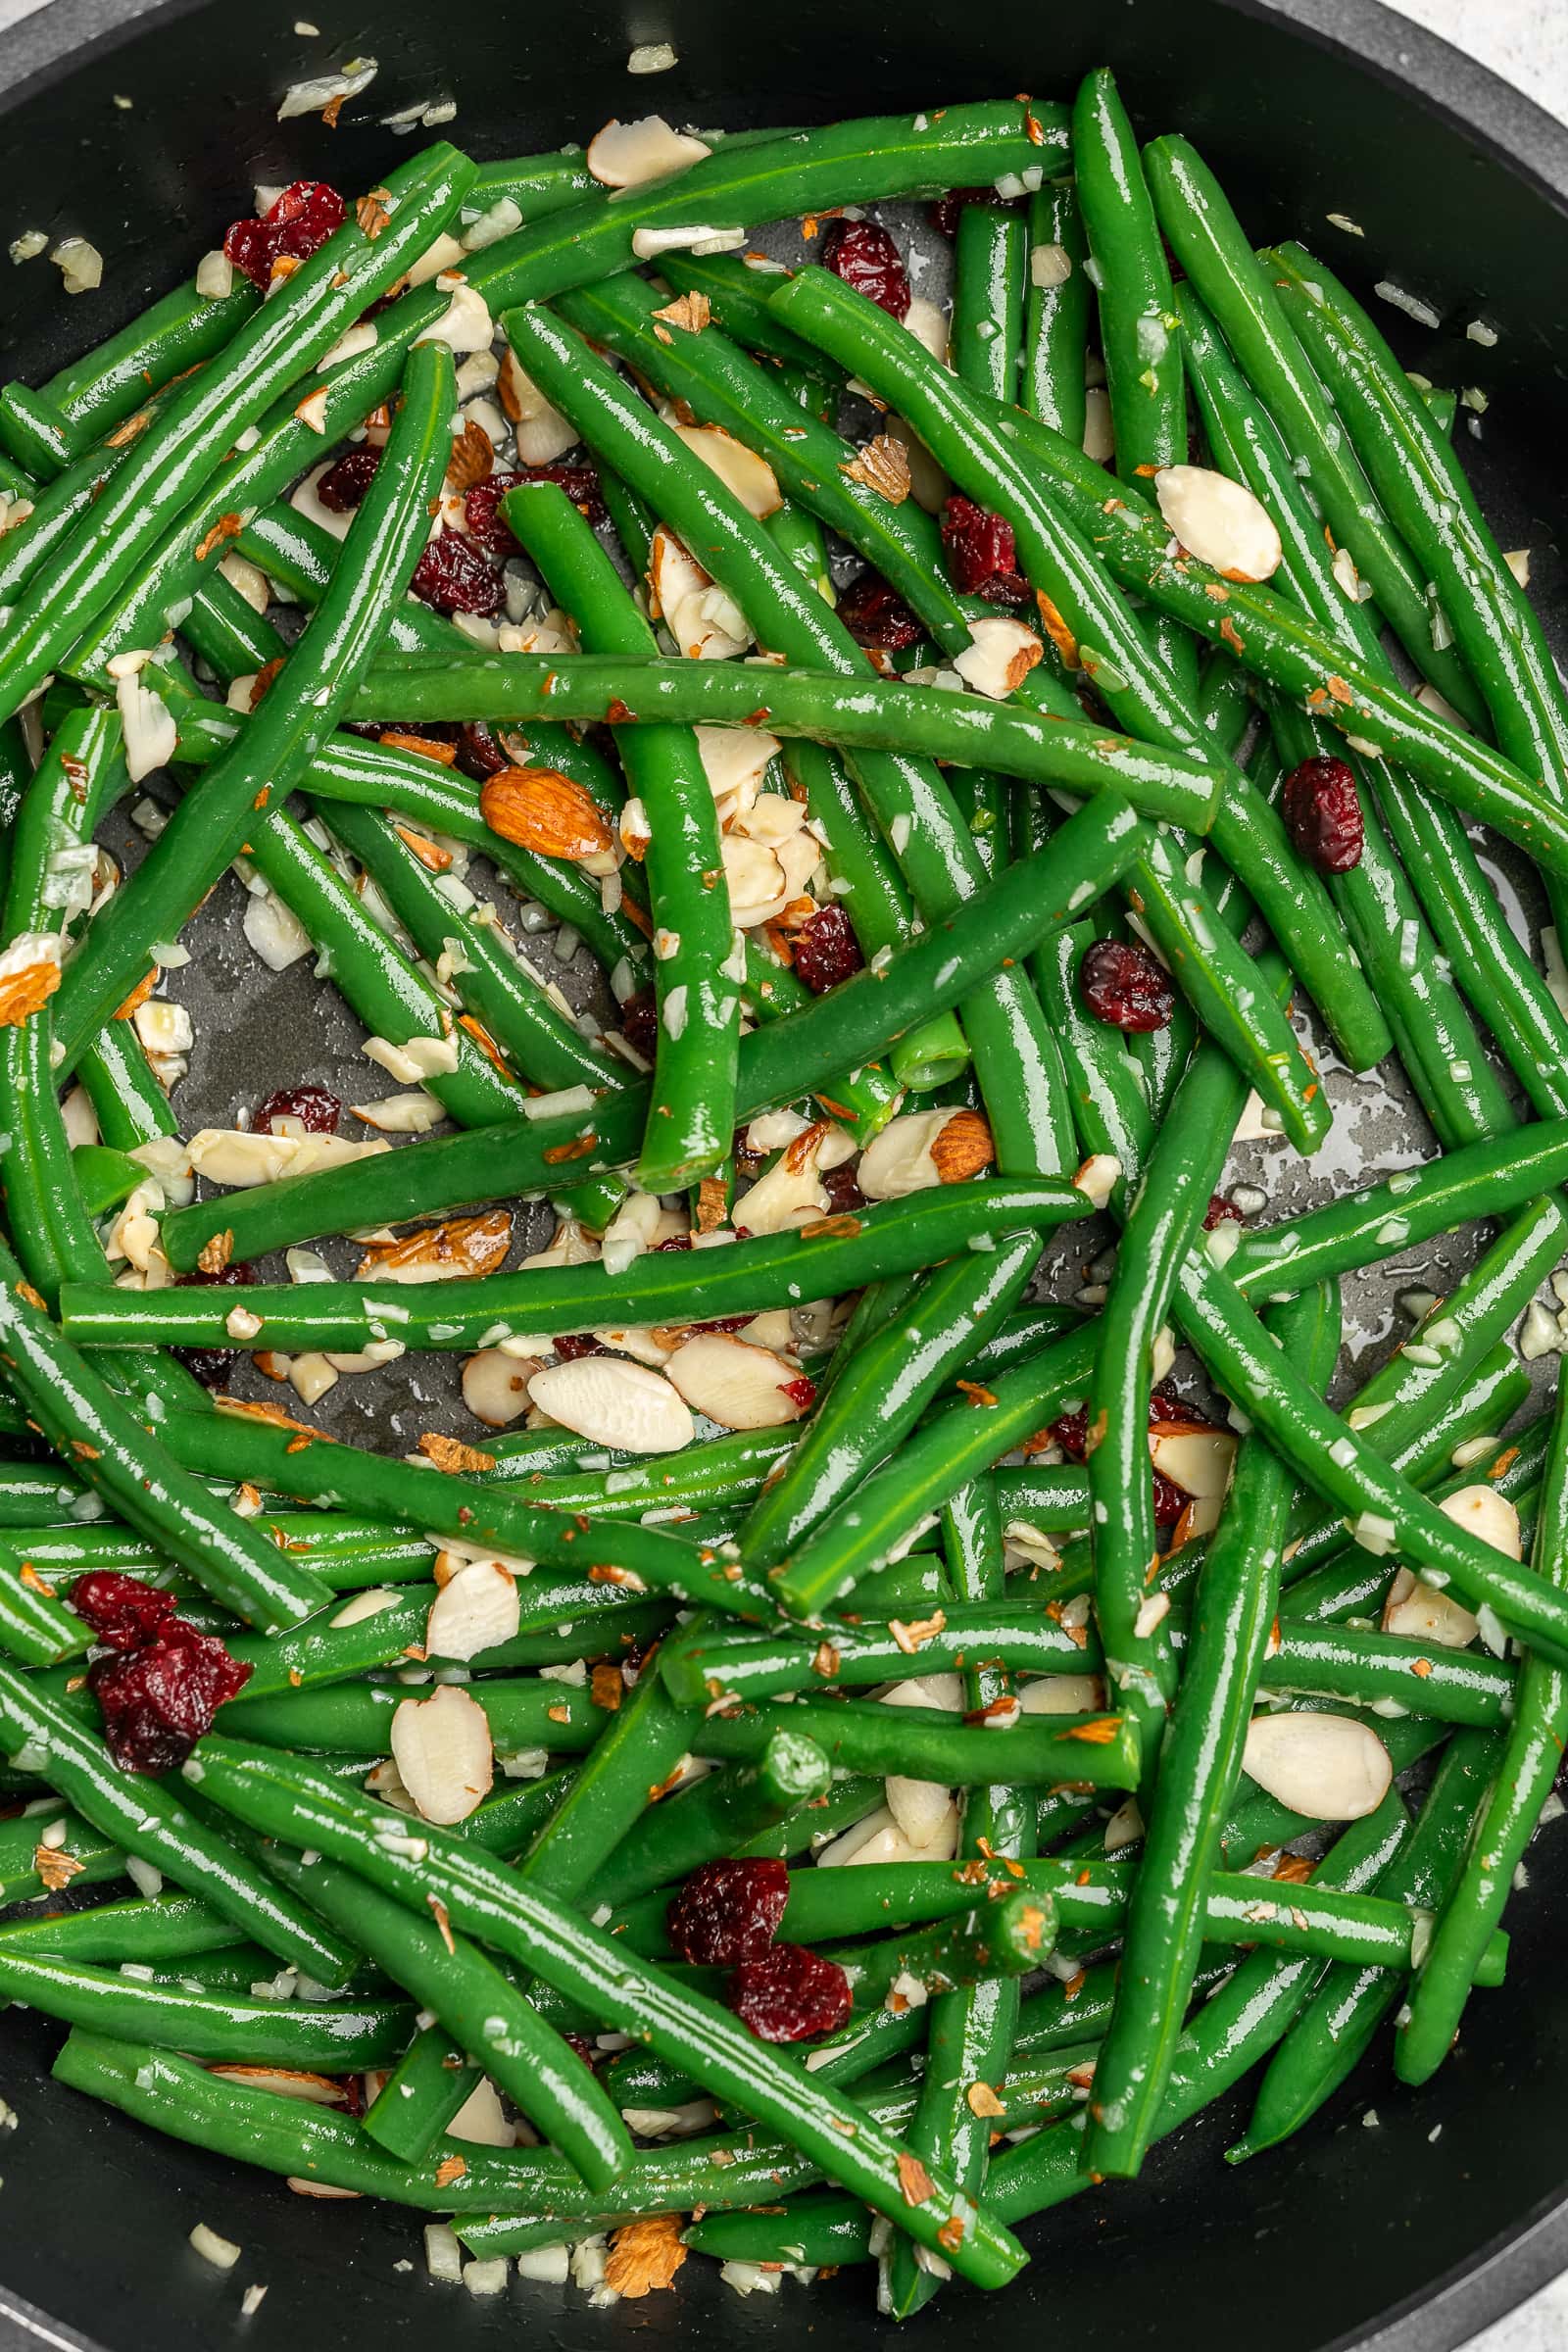 Garlic green beans with cranberries and almonds in a frying pan.